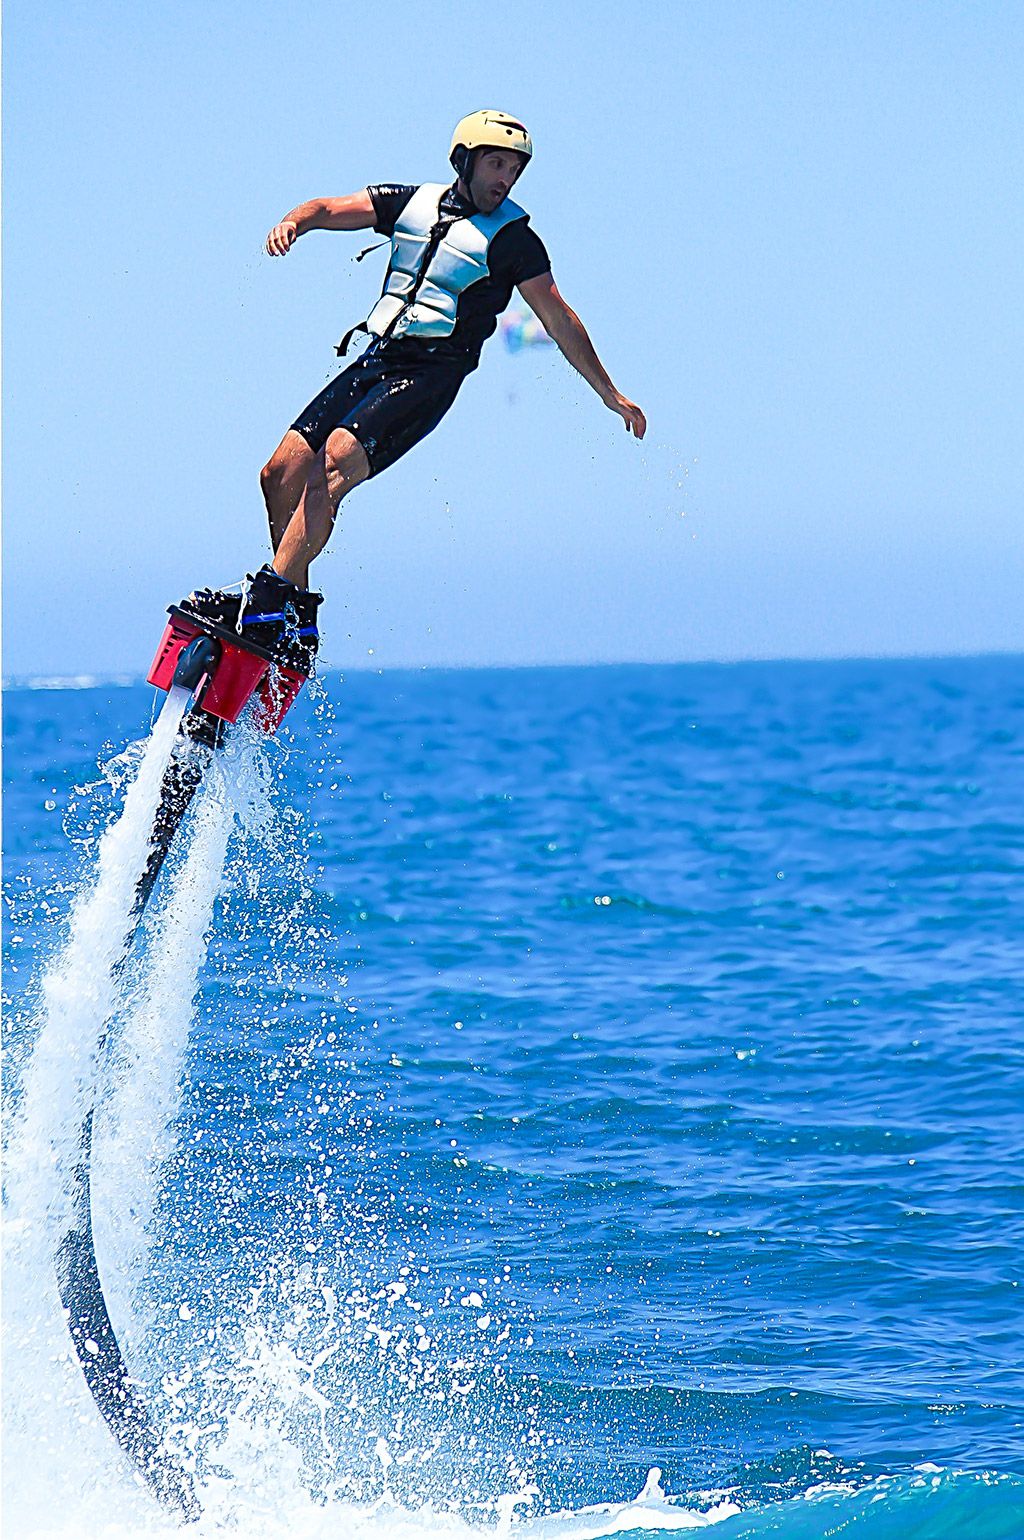 Flyboards-Are-Here-to-Make-Your-Boring-Lake-Picnics-Fun-_-Rent-a-Flyboard-at-Crosslake-Brainerd,-MN